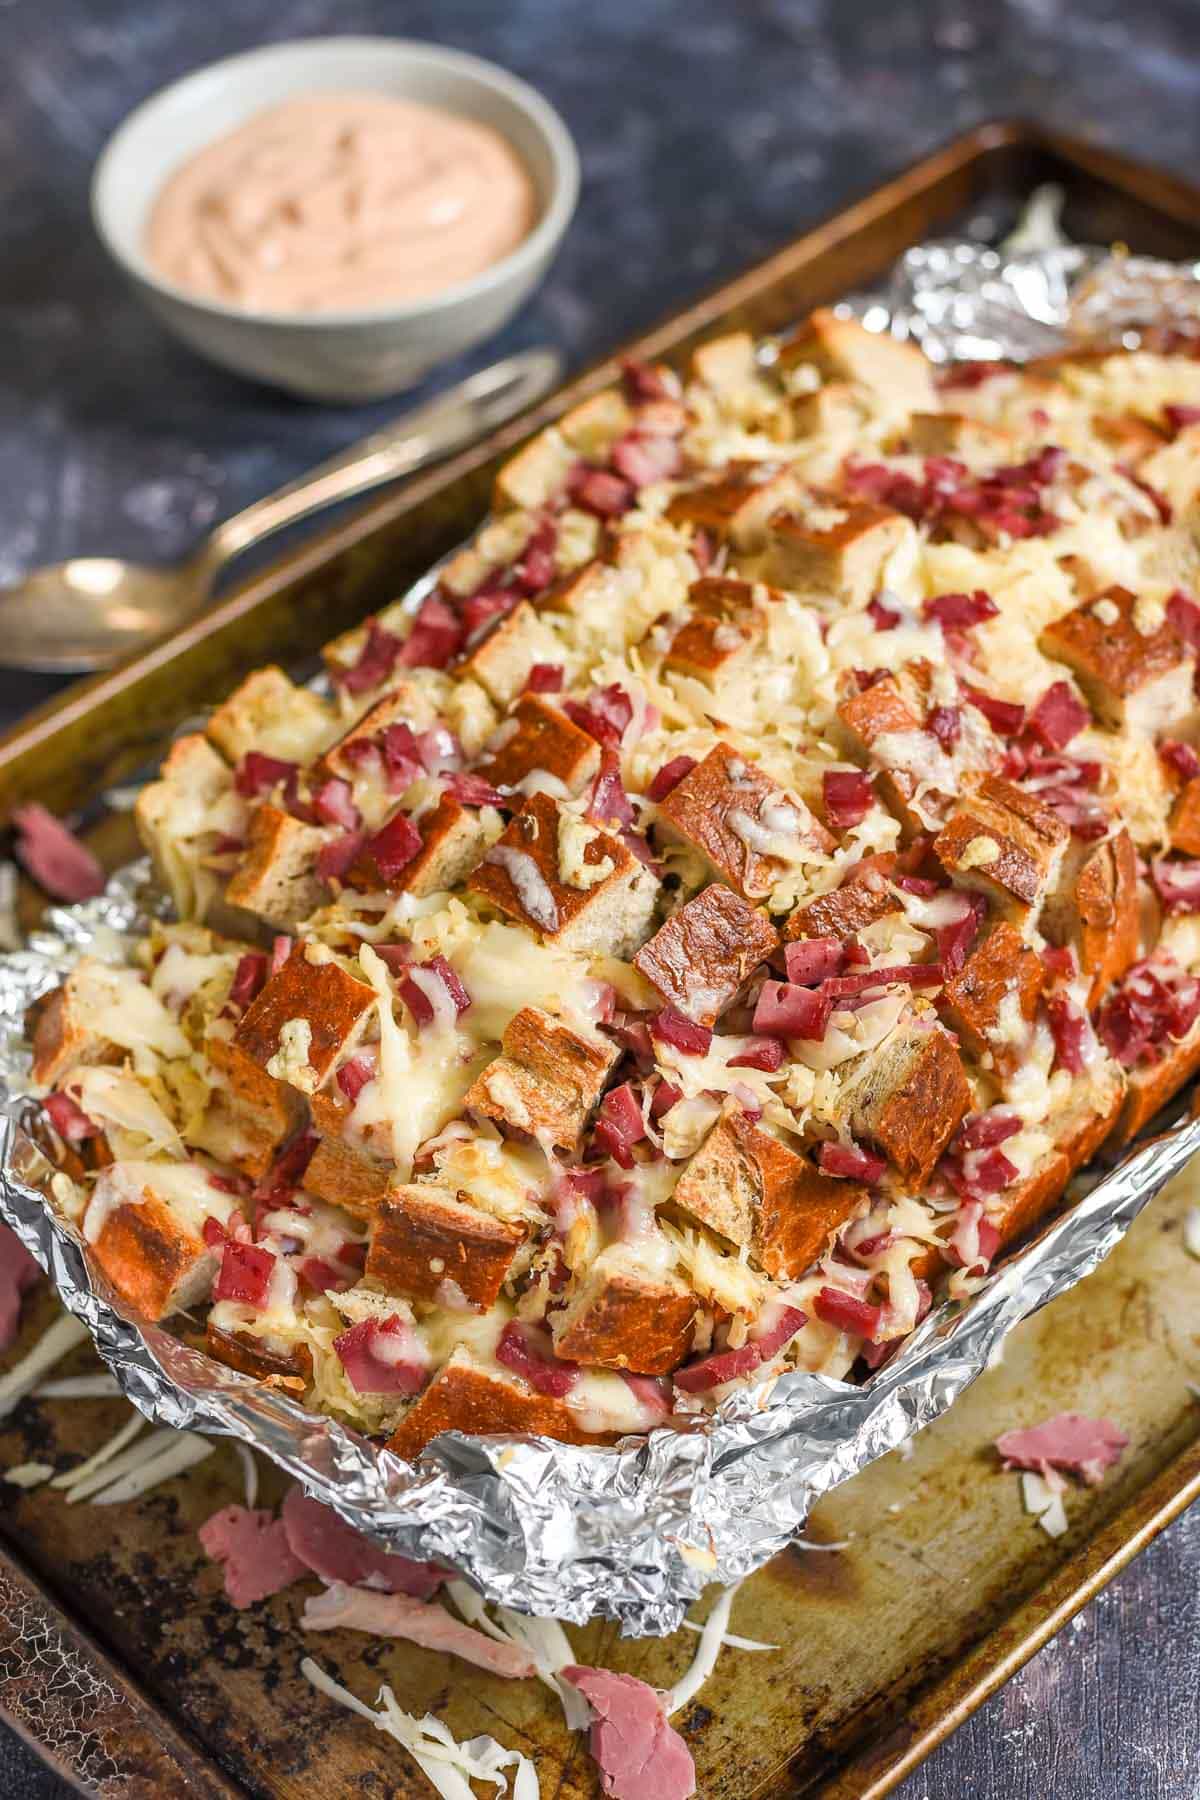 Reuben pull-apart bread with dipping sauce